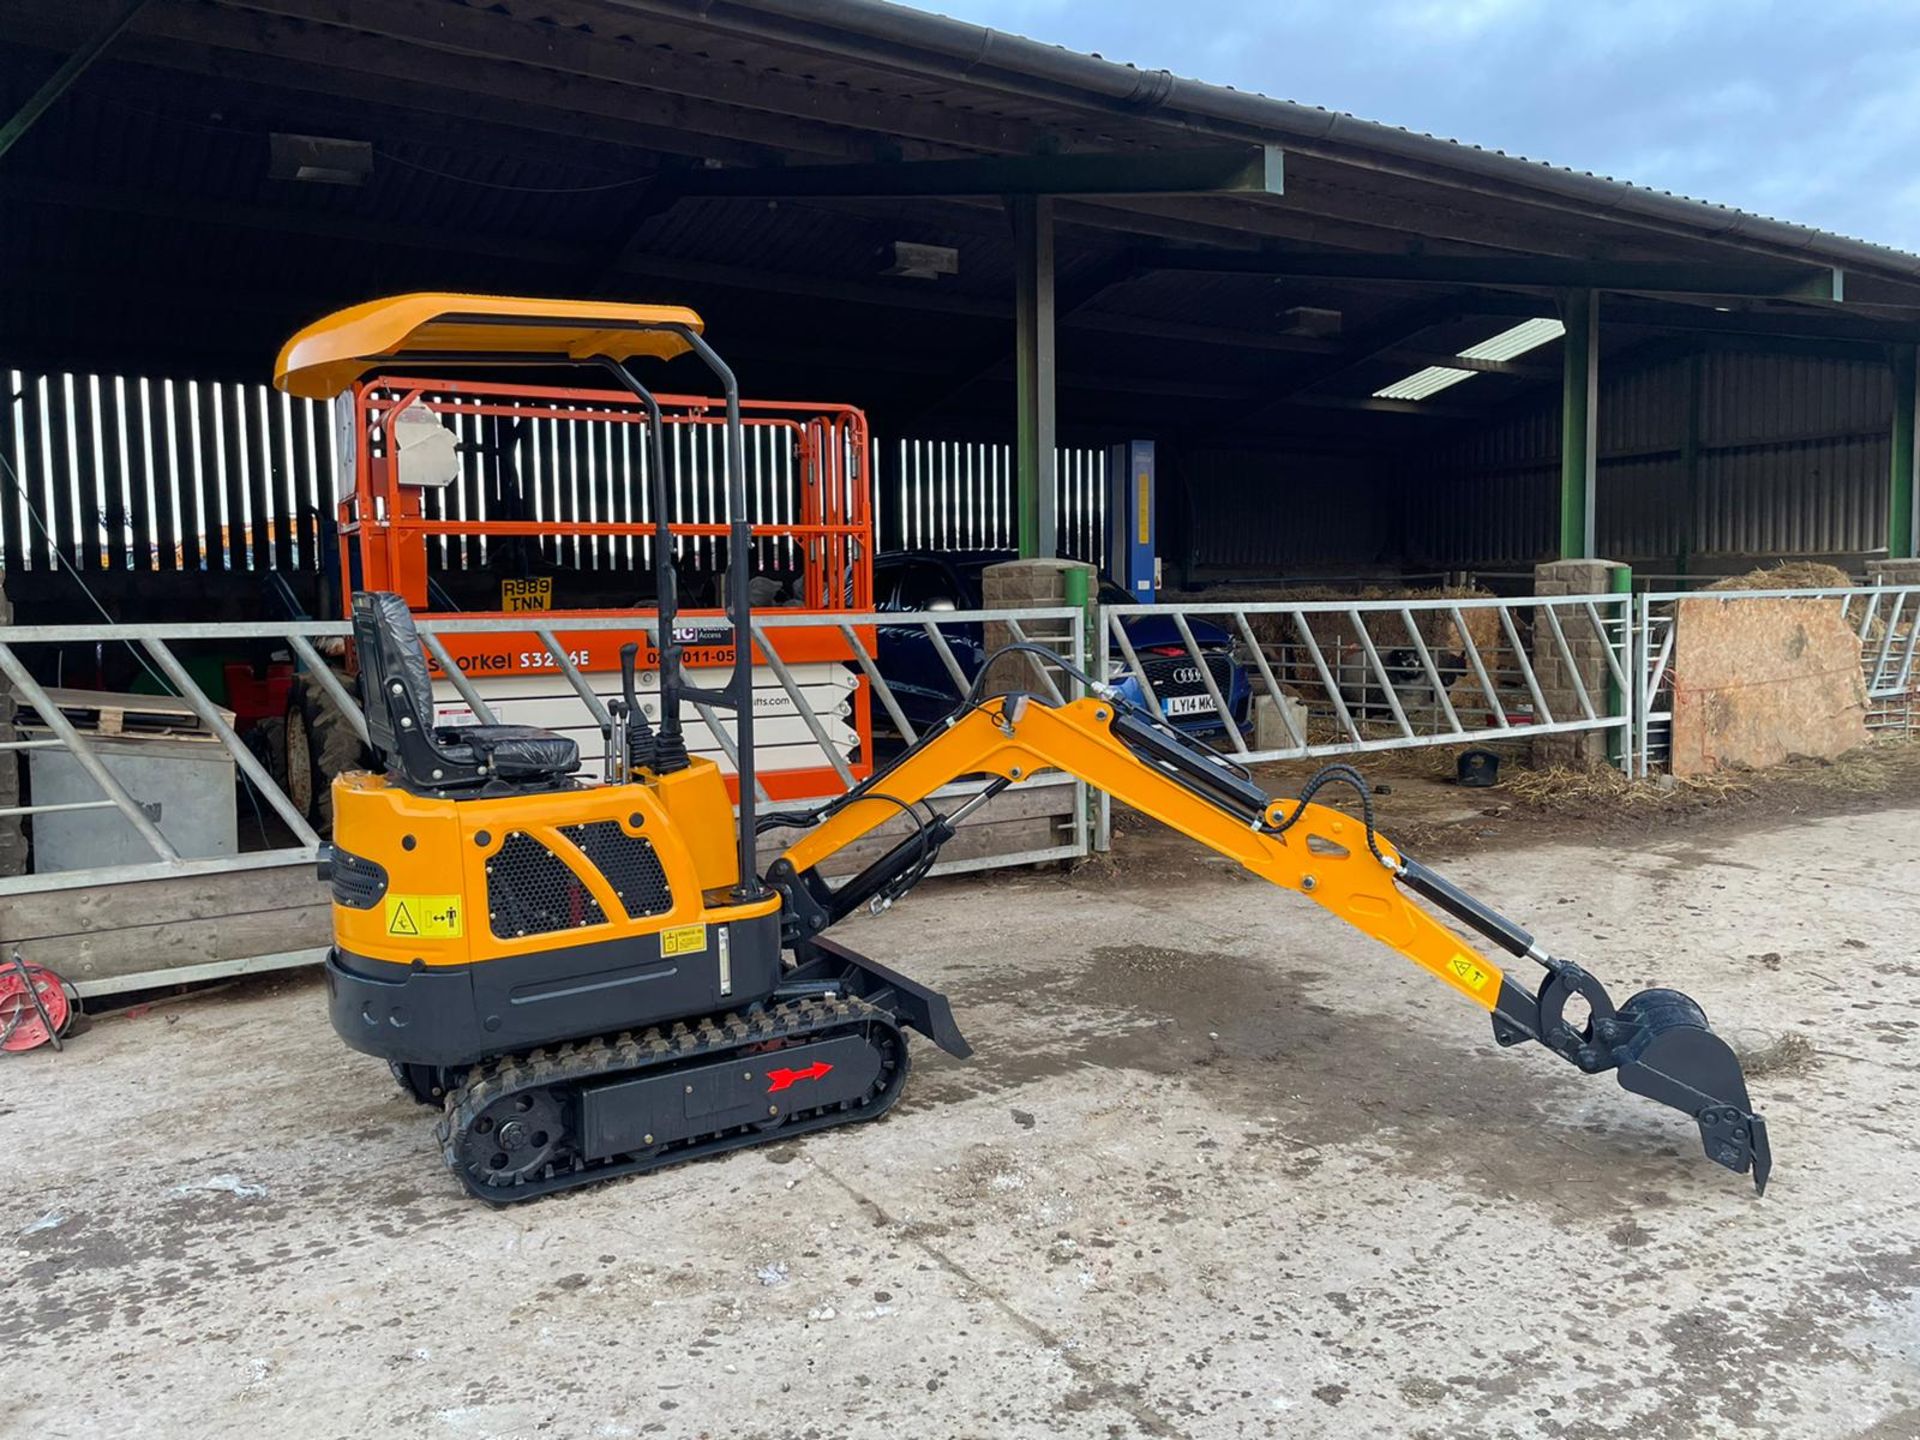 RHINOCEROS LM10 MINI RUBBER TRACKED DIGGER / EXCAVATOR, BRAND NEW AND UNUSED 3 X BUCKETS *PLUS VAT* - Image 9 of 10